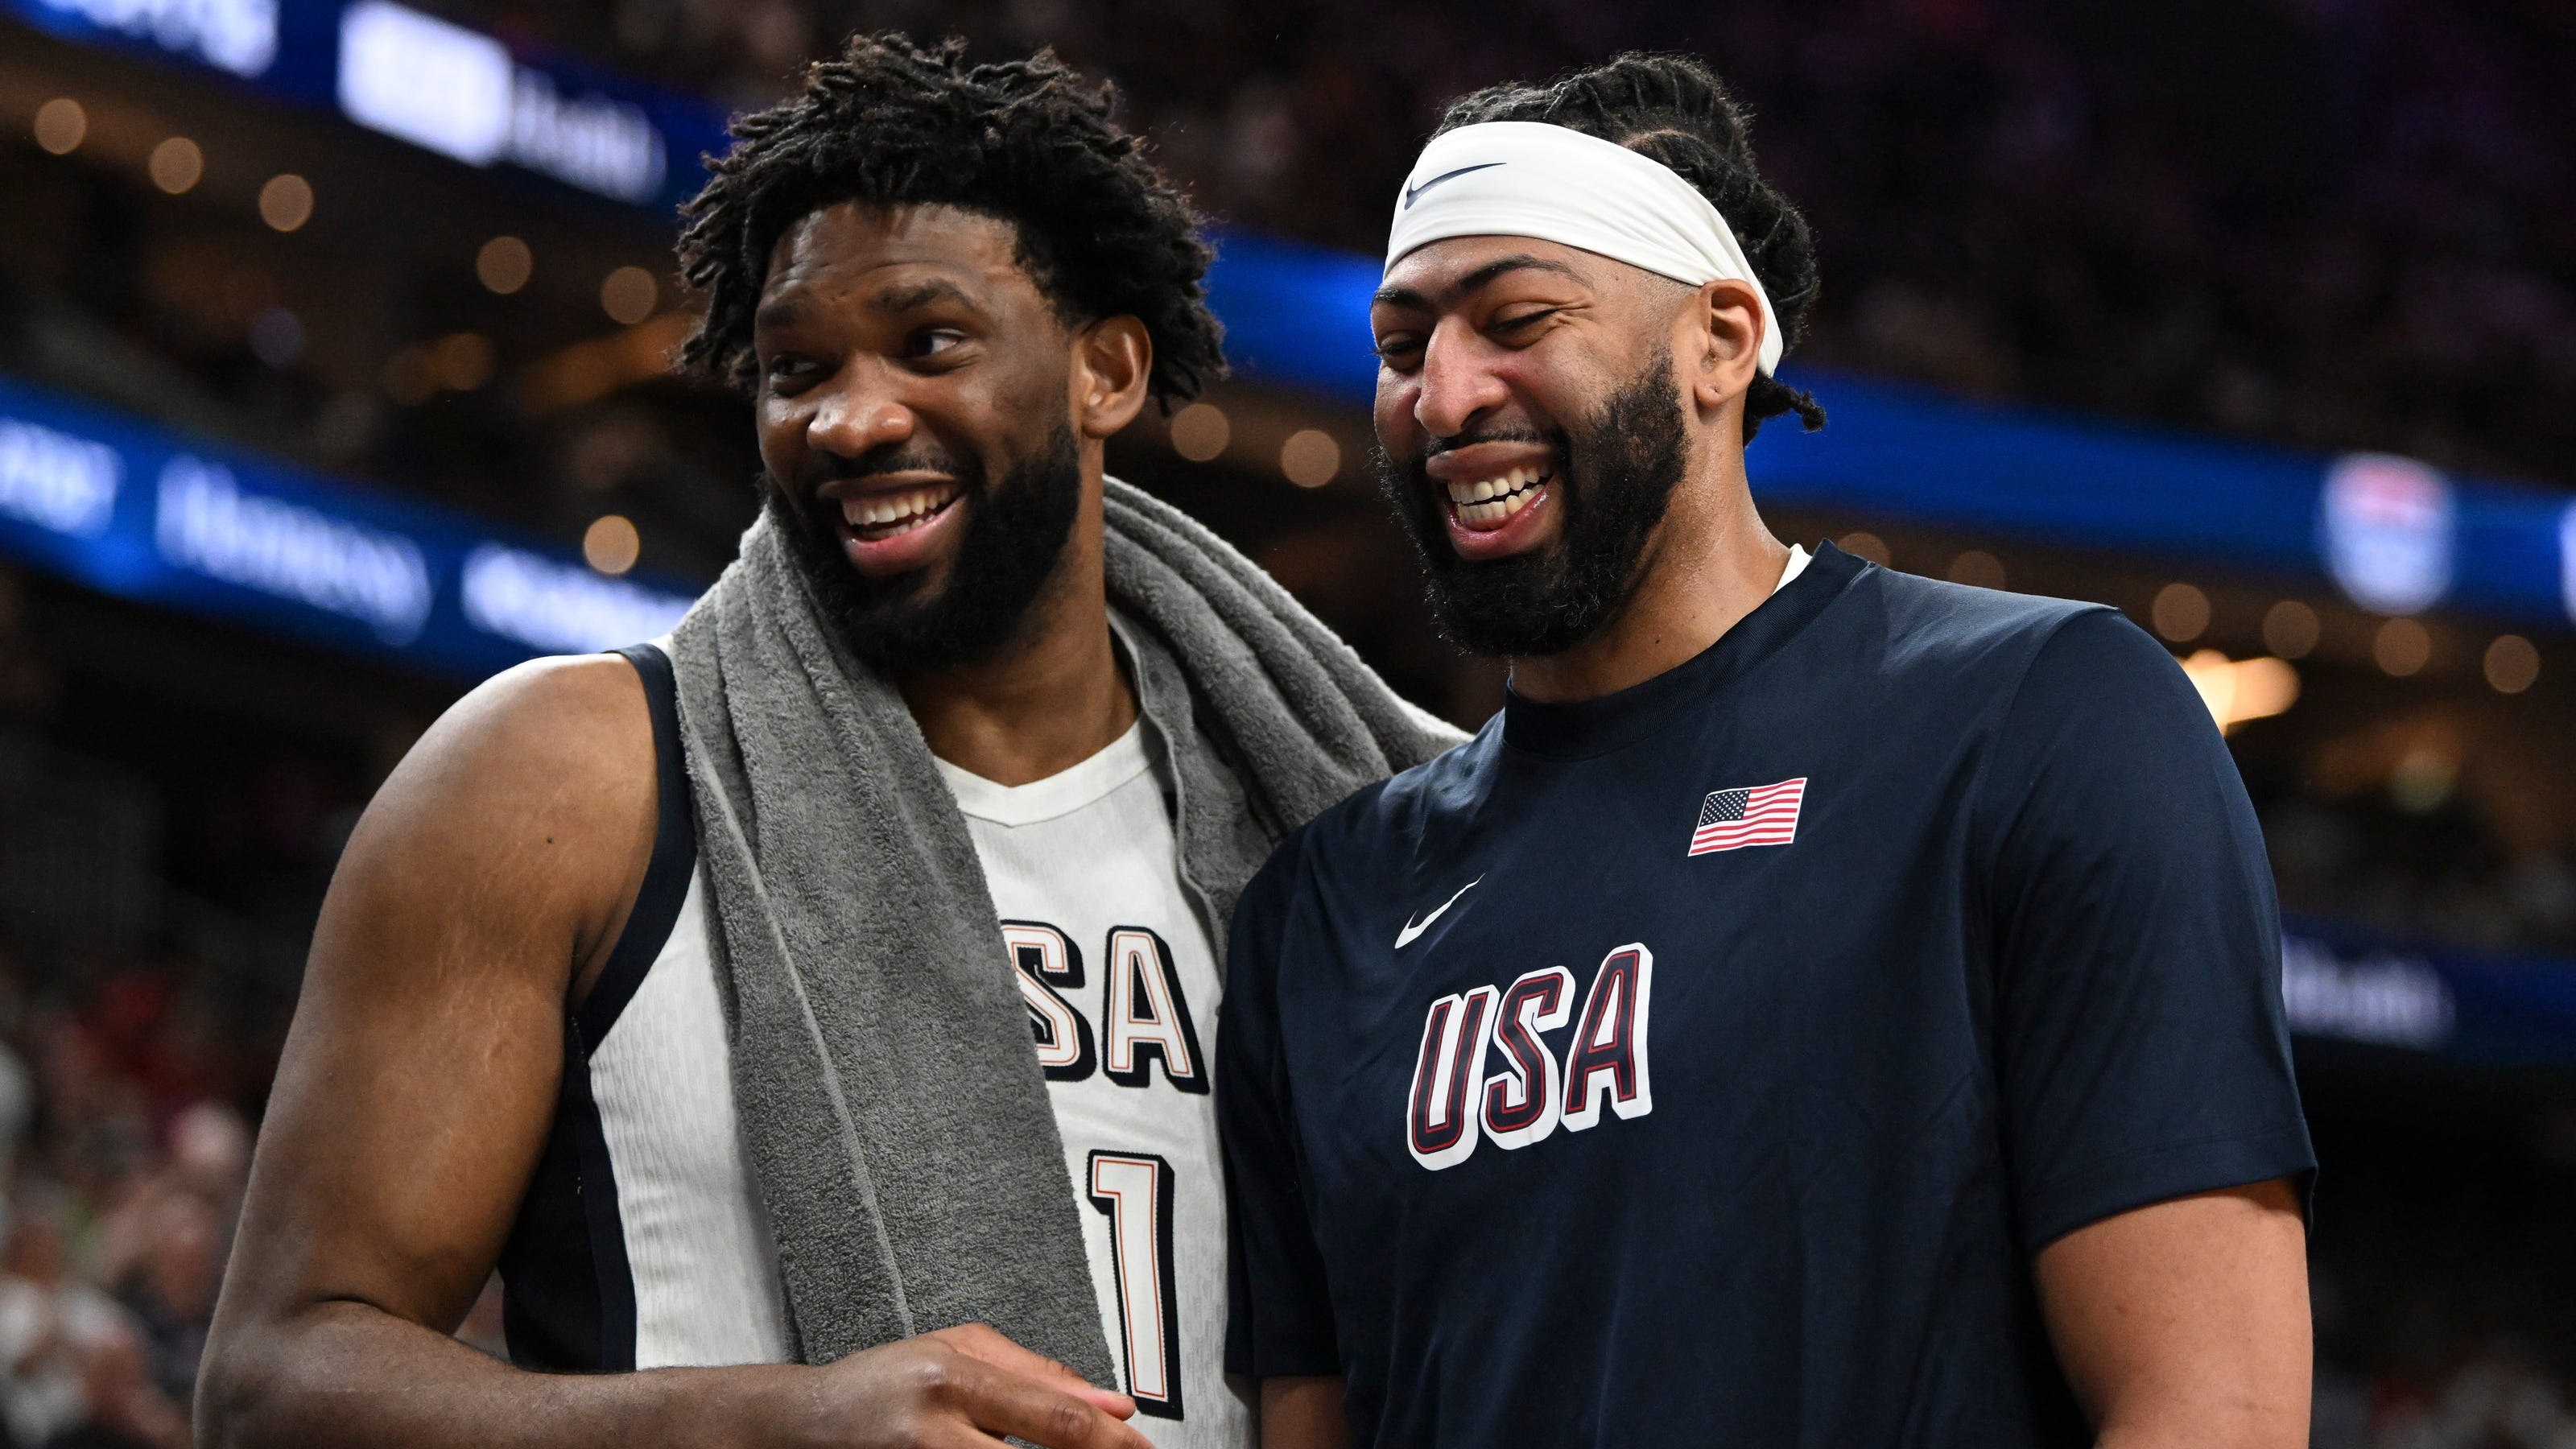 Joel Embiid, Anthony Davis and Bam Adebayo effective 1-2-3 punch at center for Team USA